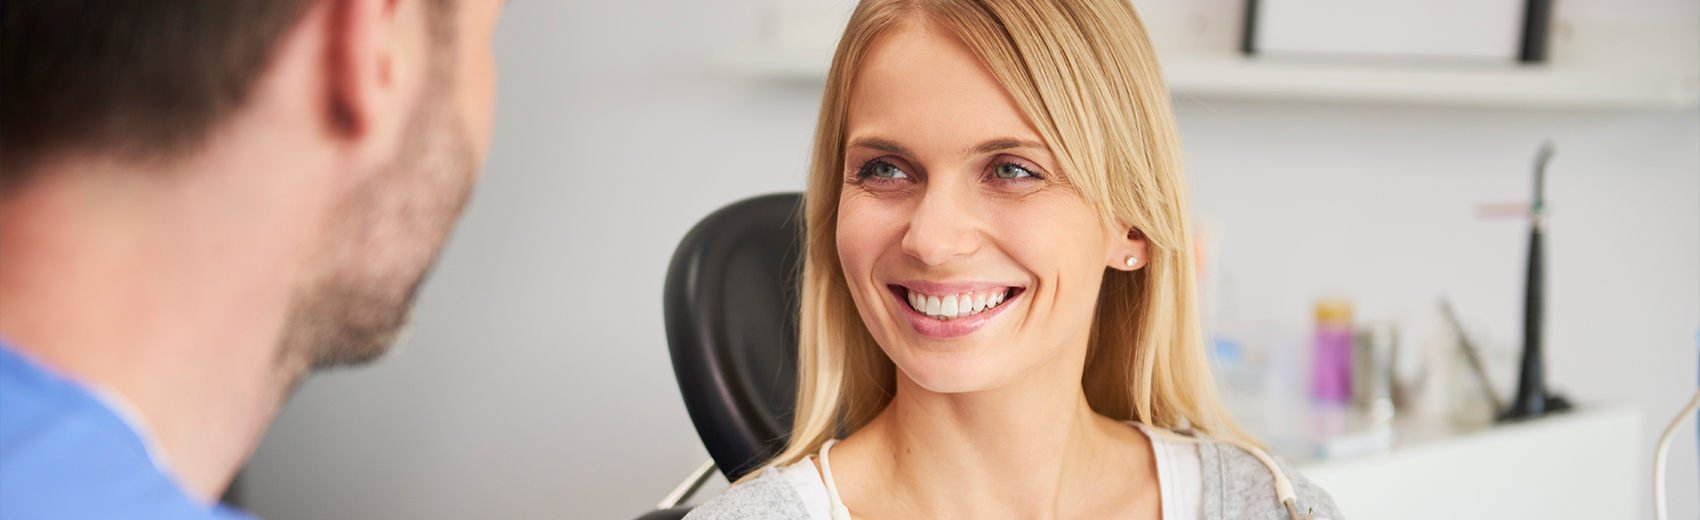 Blonde woman smiling in the dentist's office